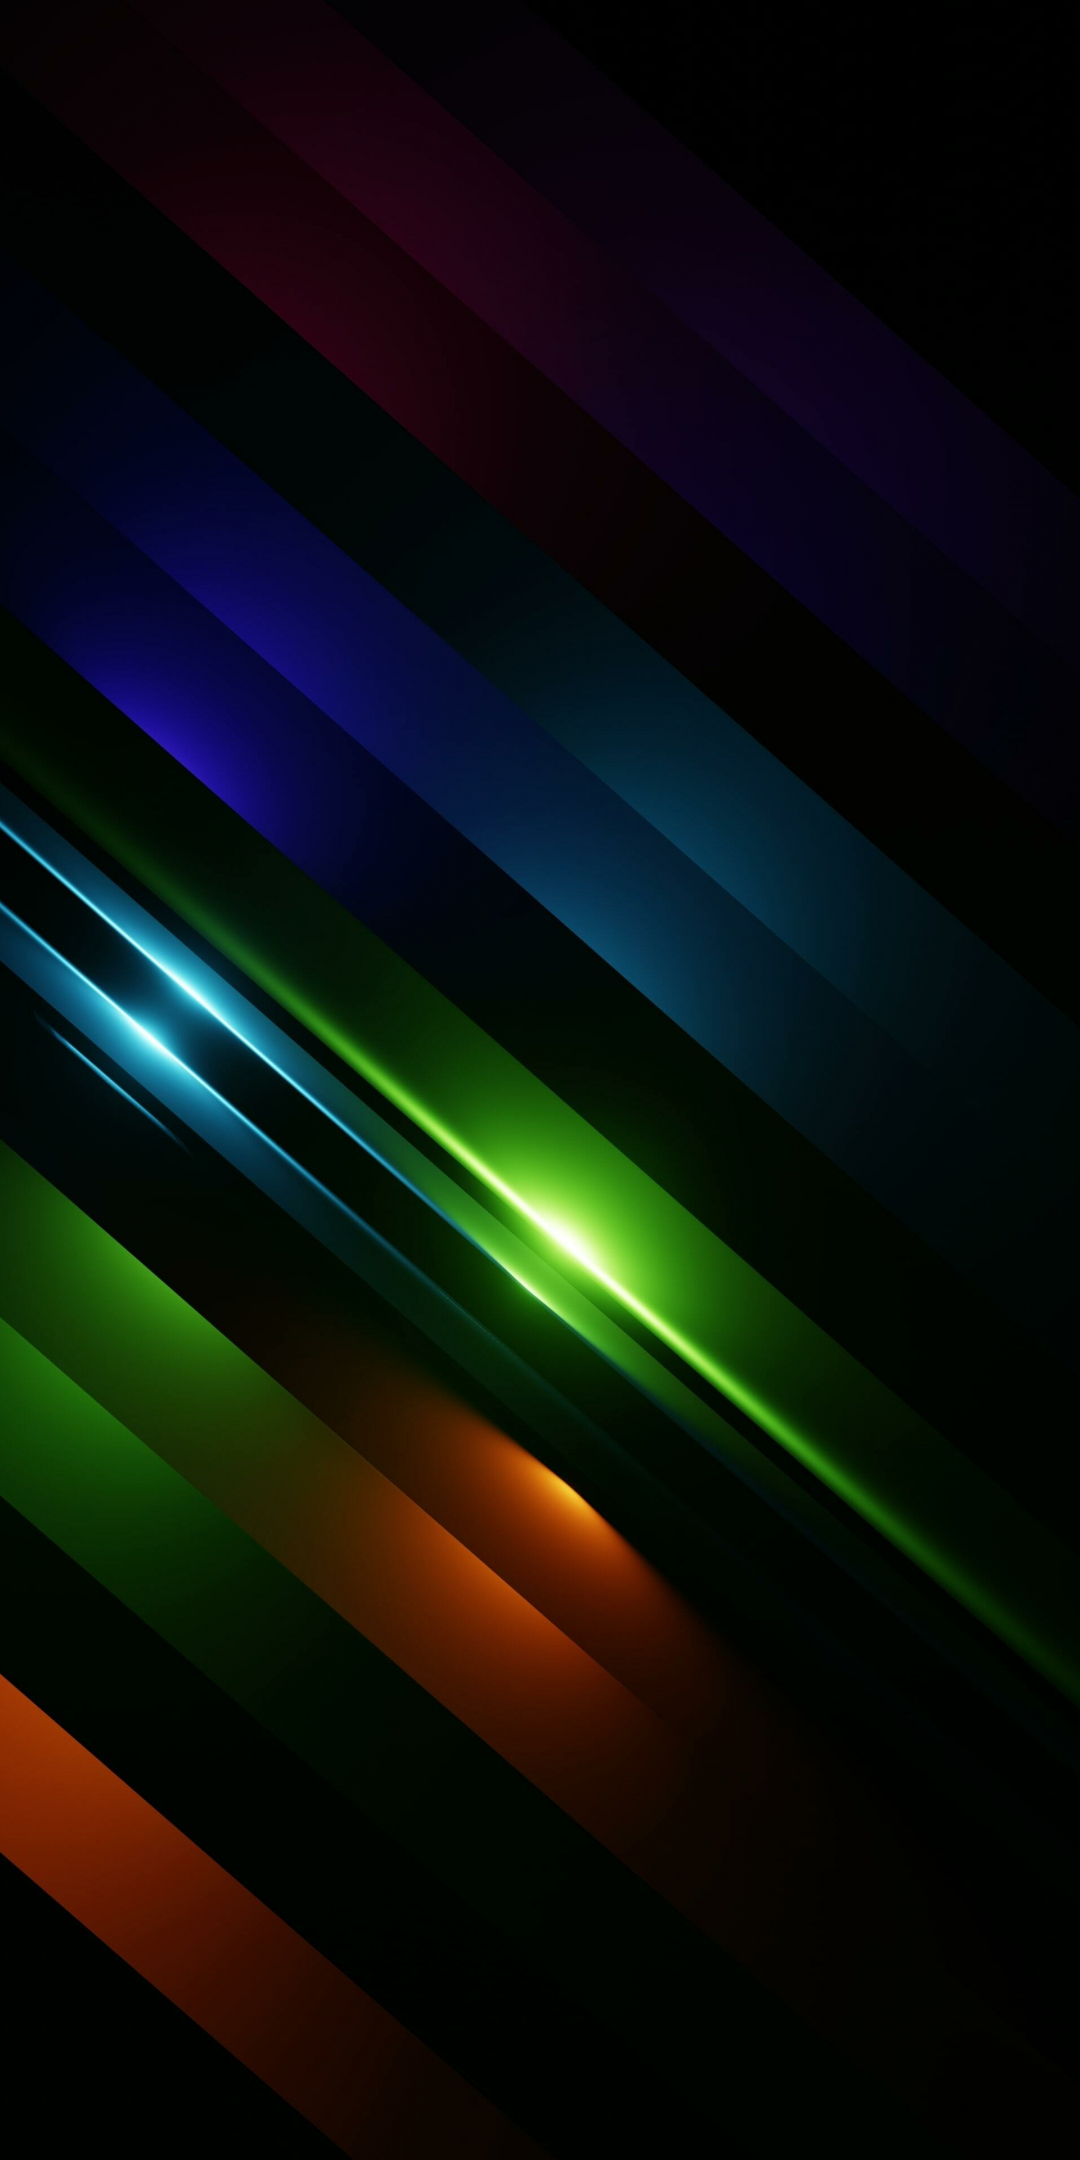 Shine and colorful, abstract, 1080x2160 wallpaper